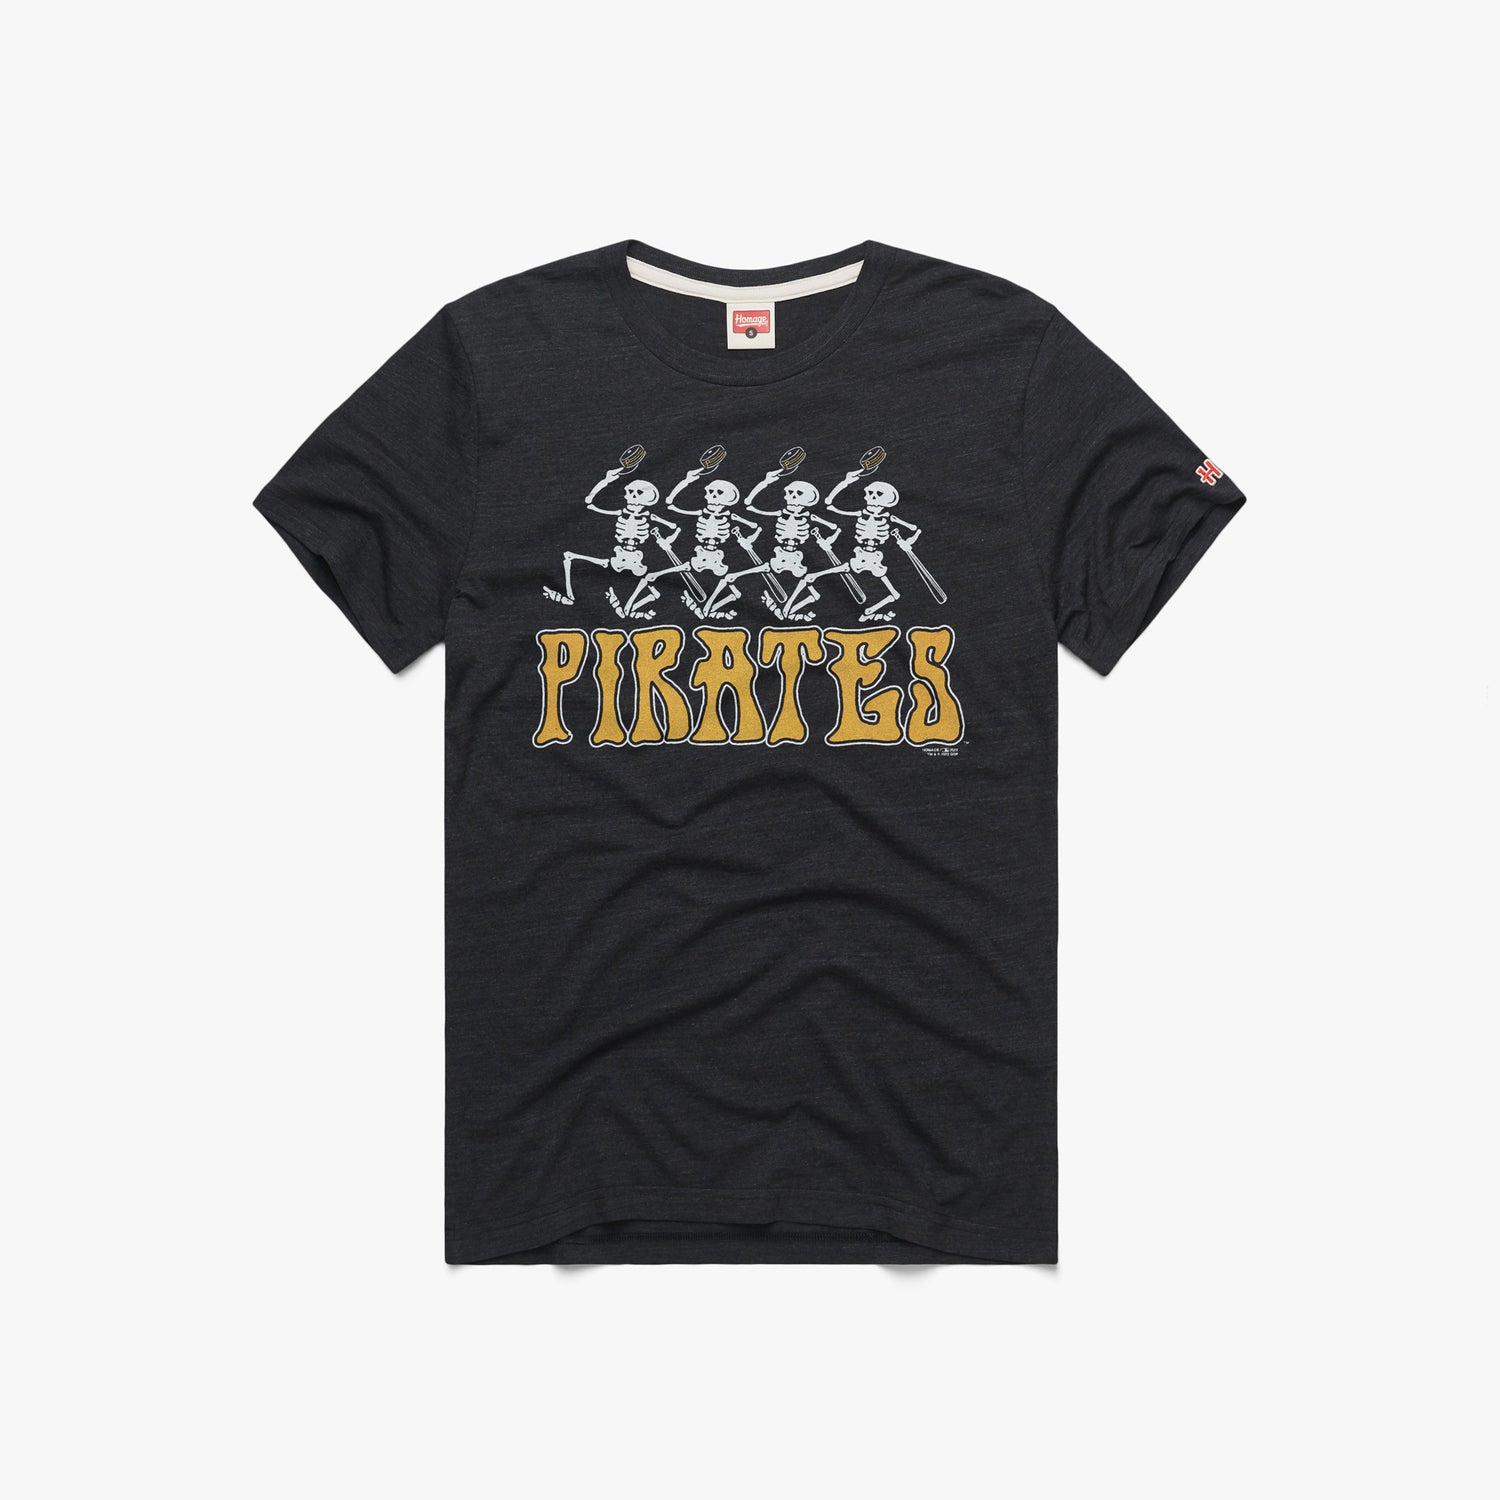 Souvenir Pittsburgh Pirates jerseys and t-shirts are on display at